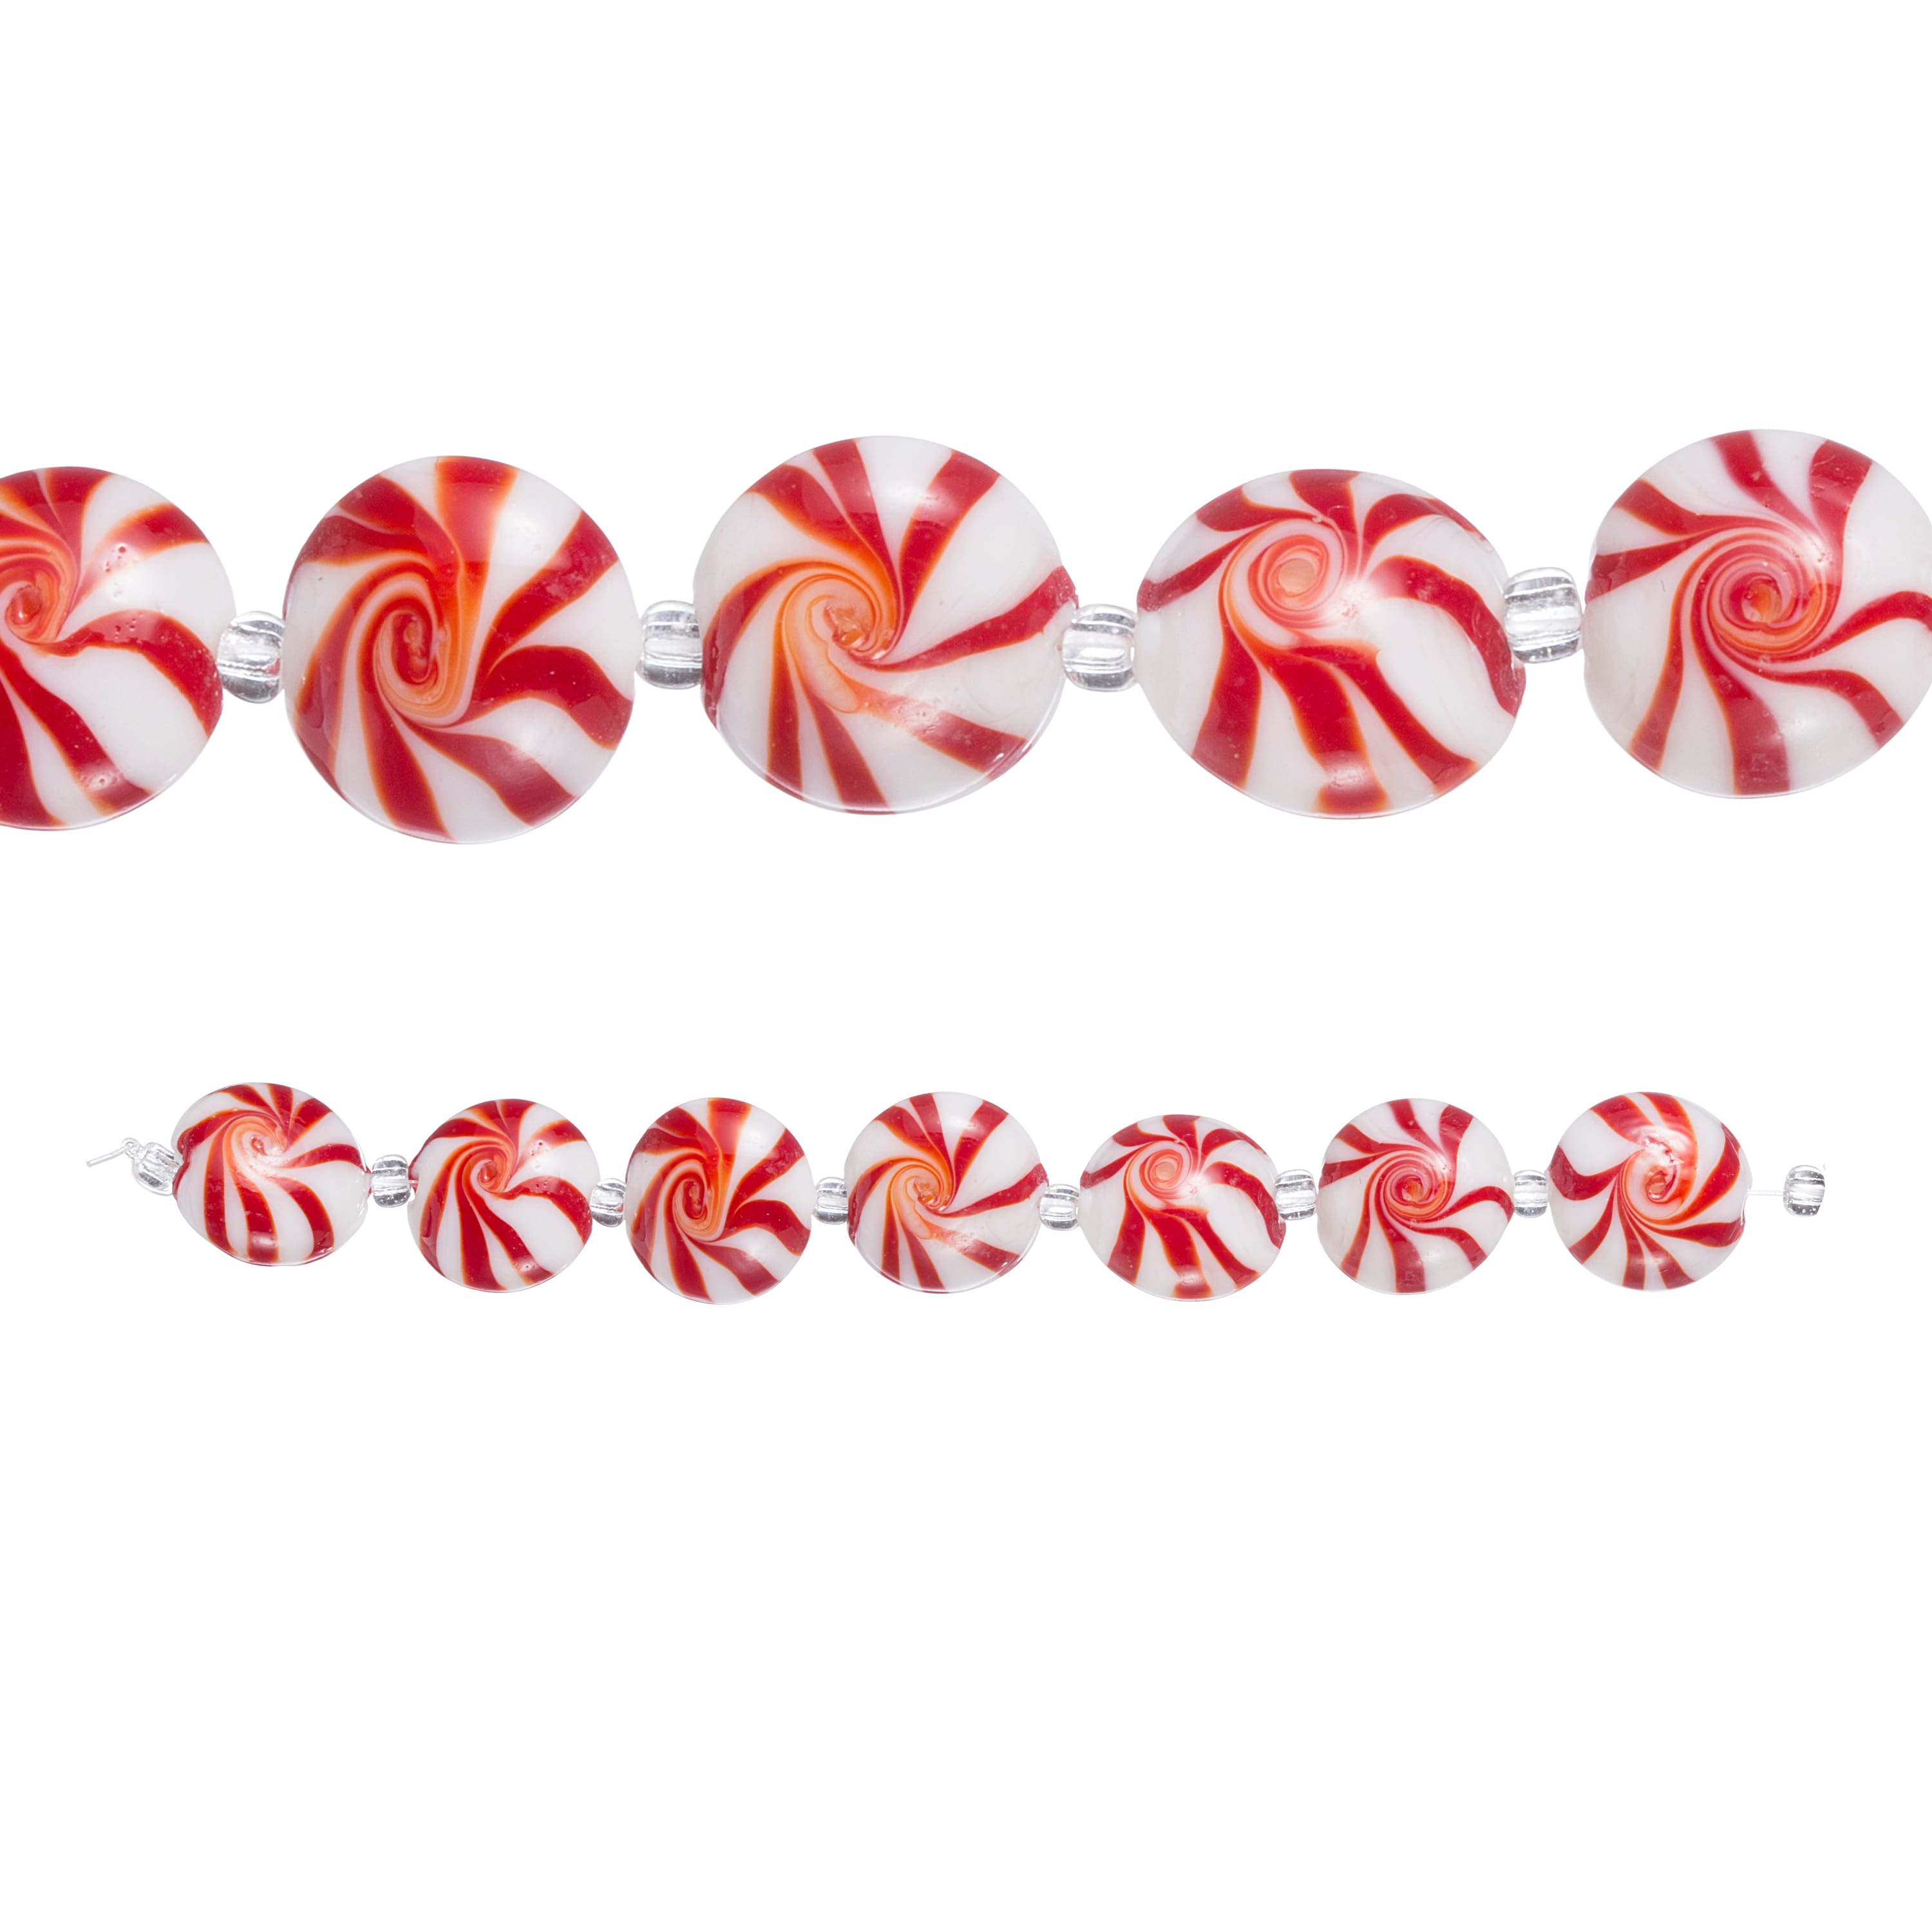 Awesome Glass Lampwork Candy Cane Beads 1 lot of 20 beads total.